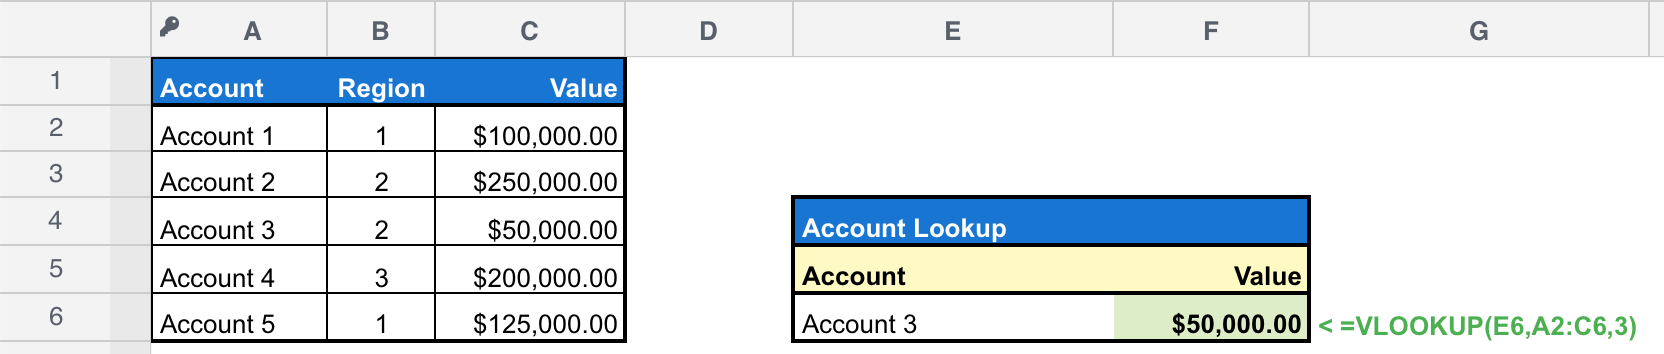 VLOOKUP-Function-2.png